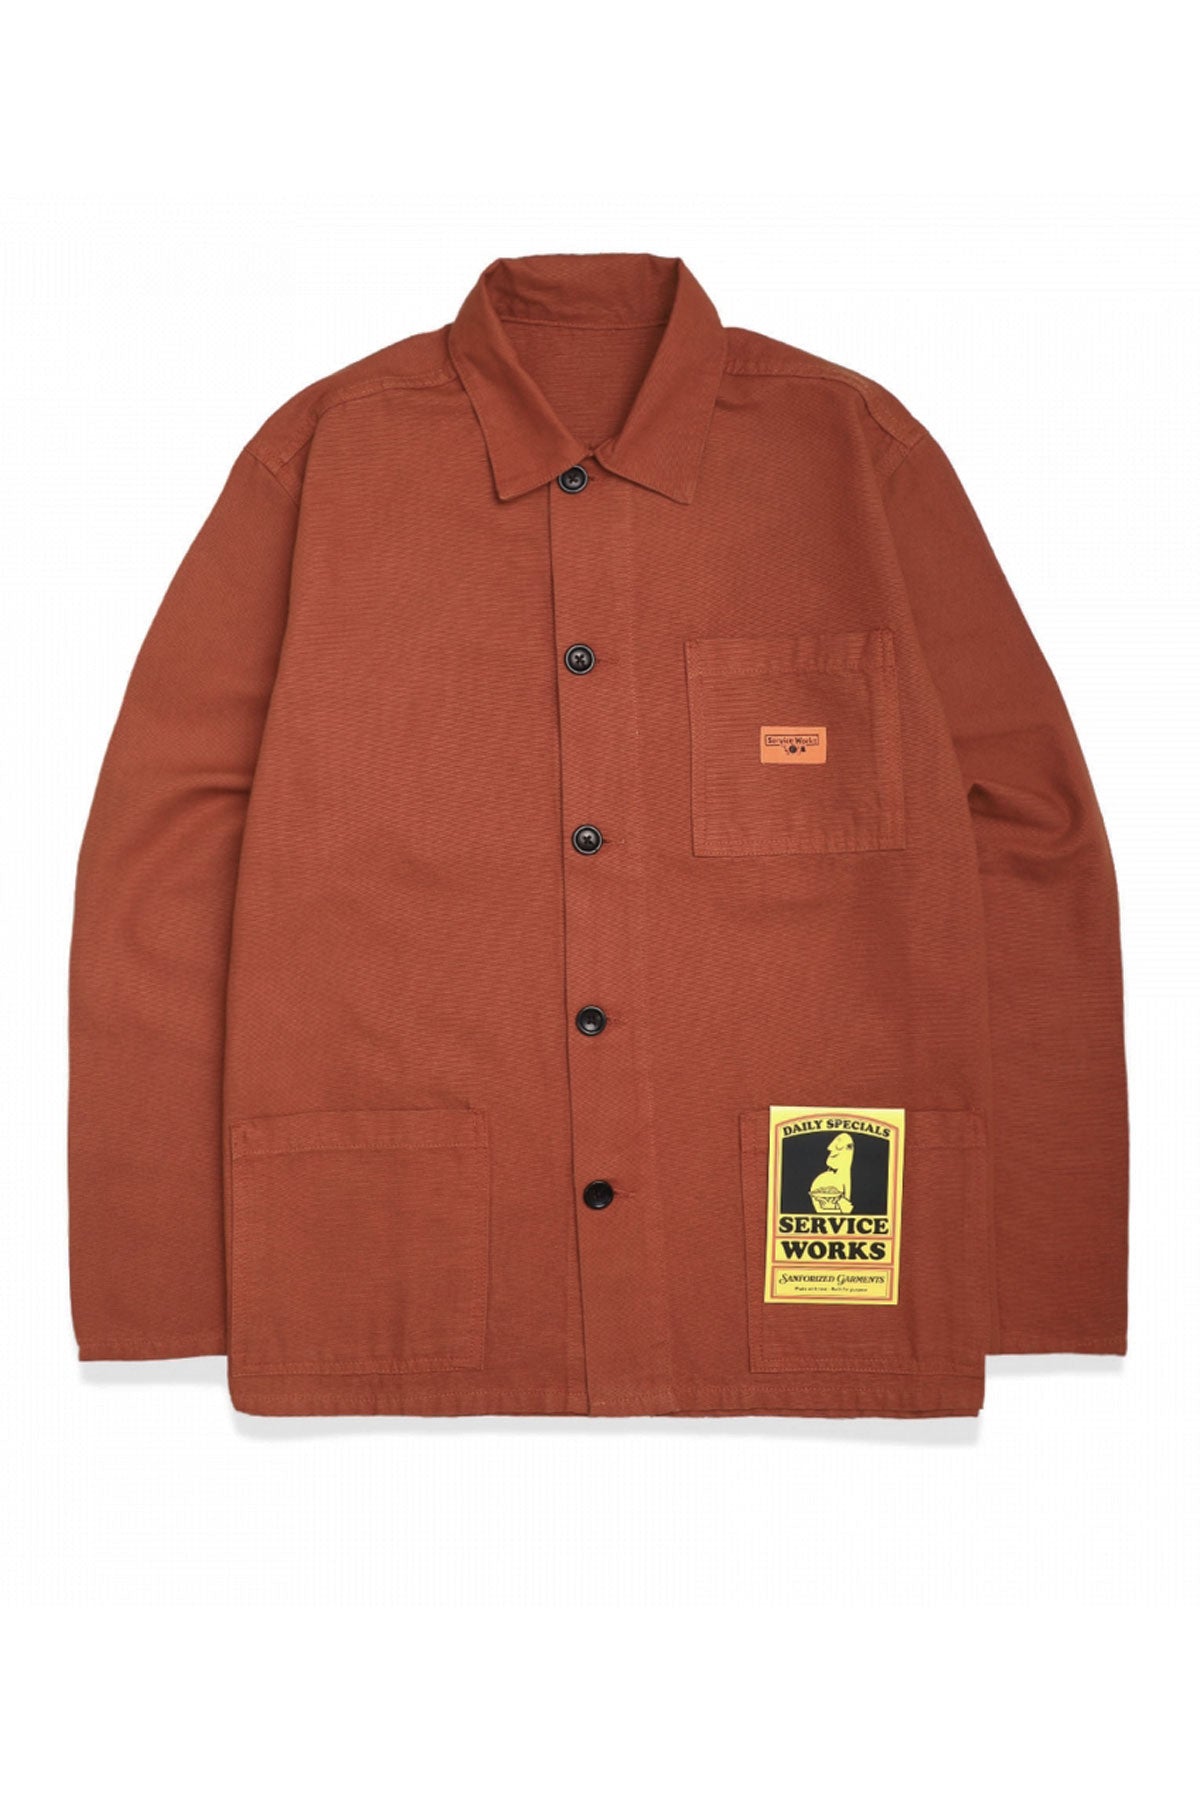 Service Works - Classic Coverall Jacket in Terracotta – The Rugged Society